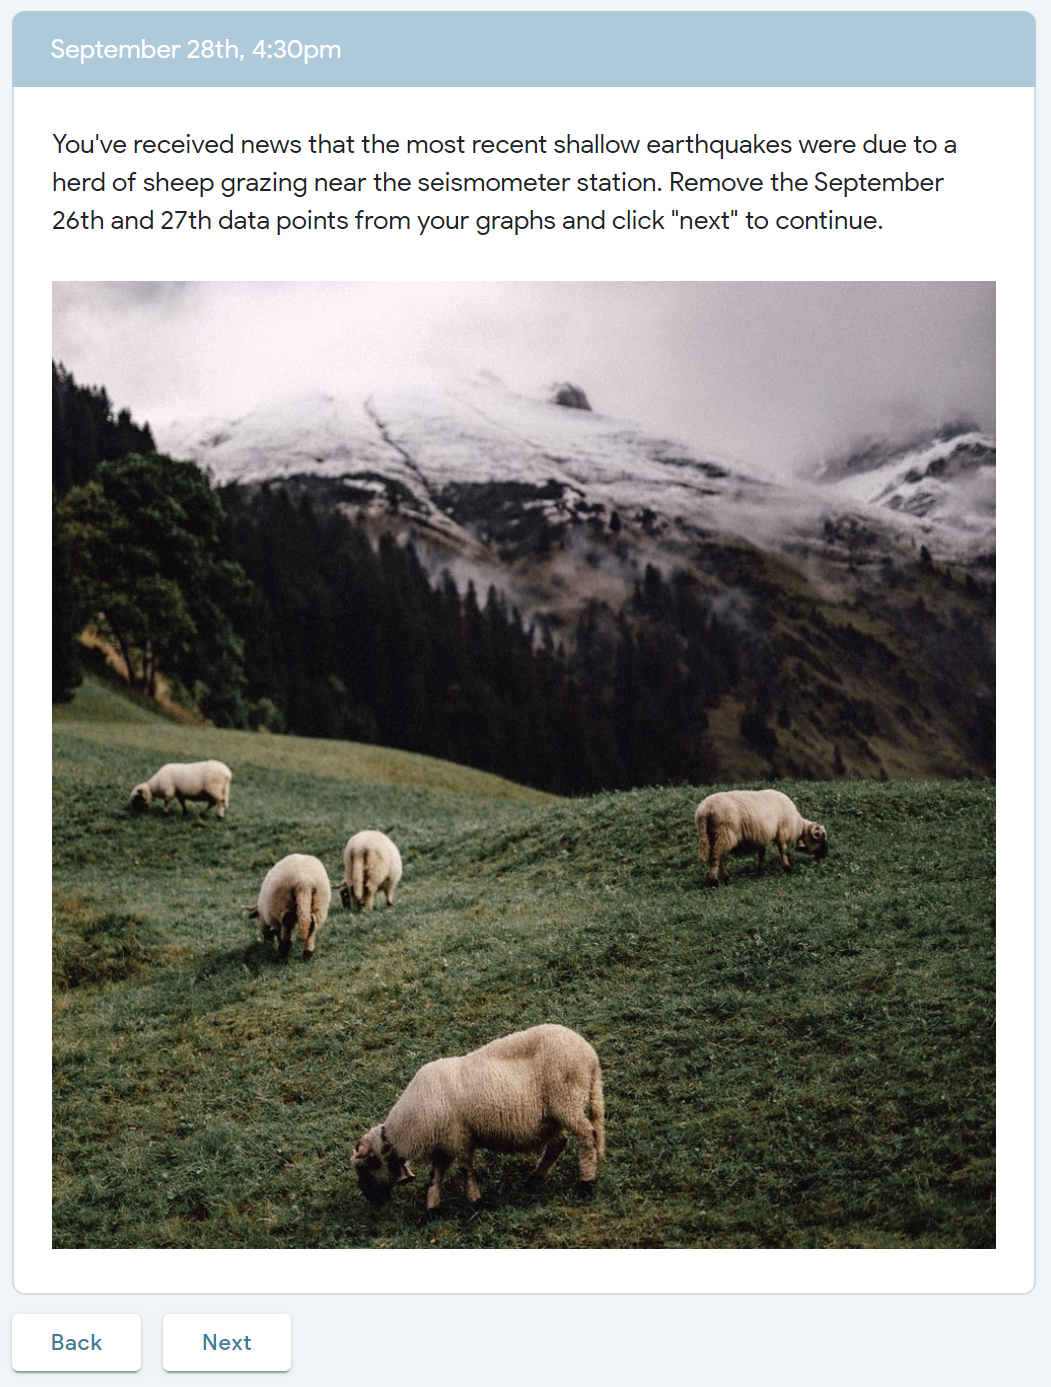 Image of sheep with a caption that they had caused an earthquake from roaming too close to the seismometer station.